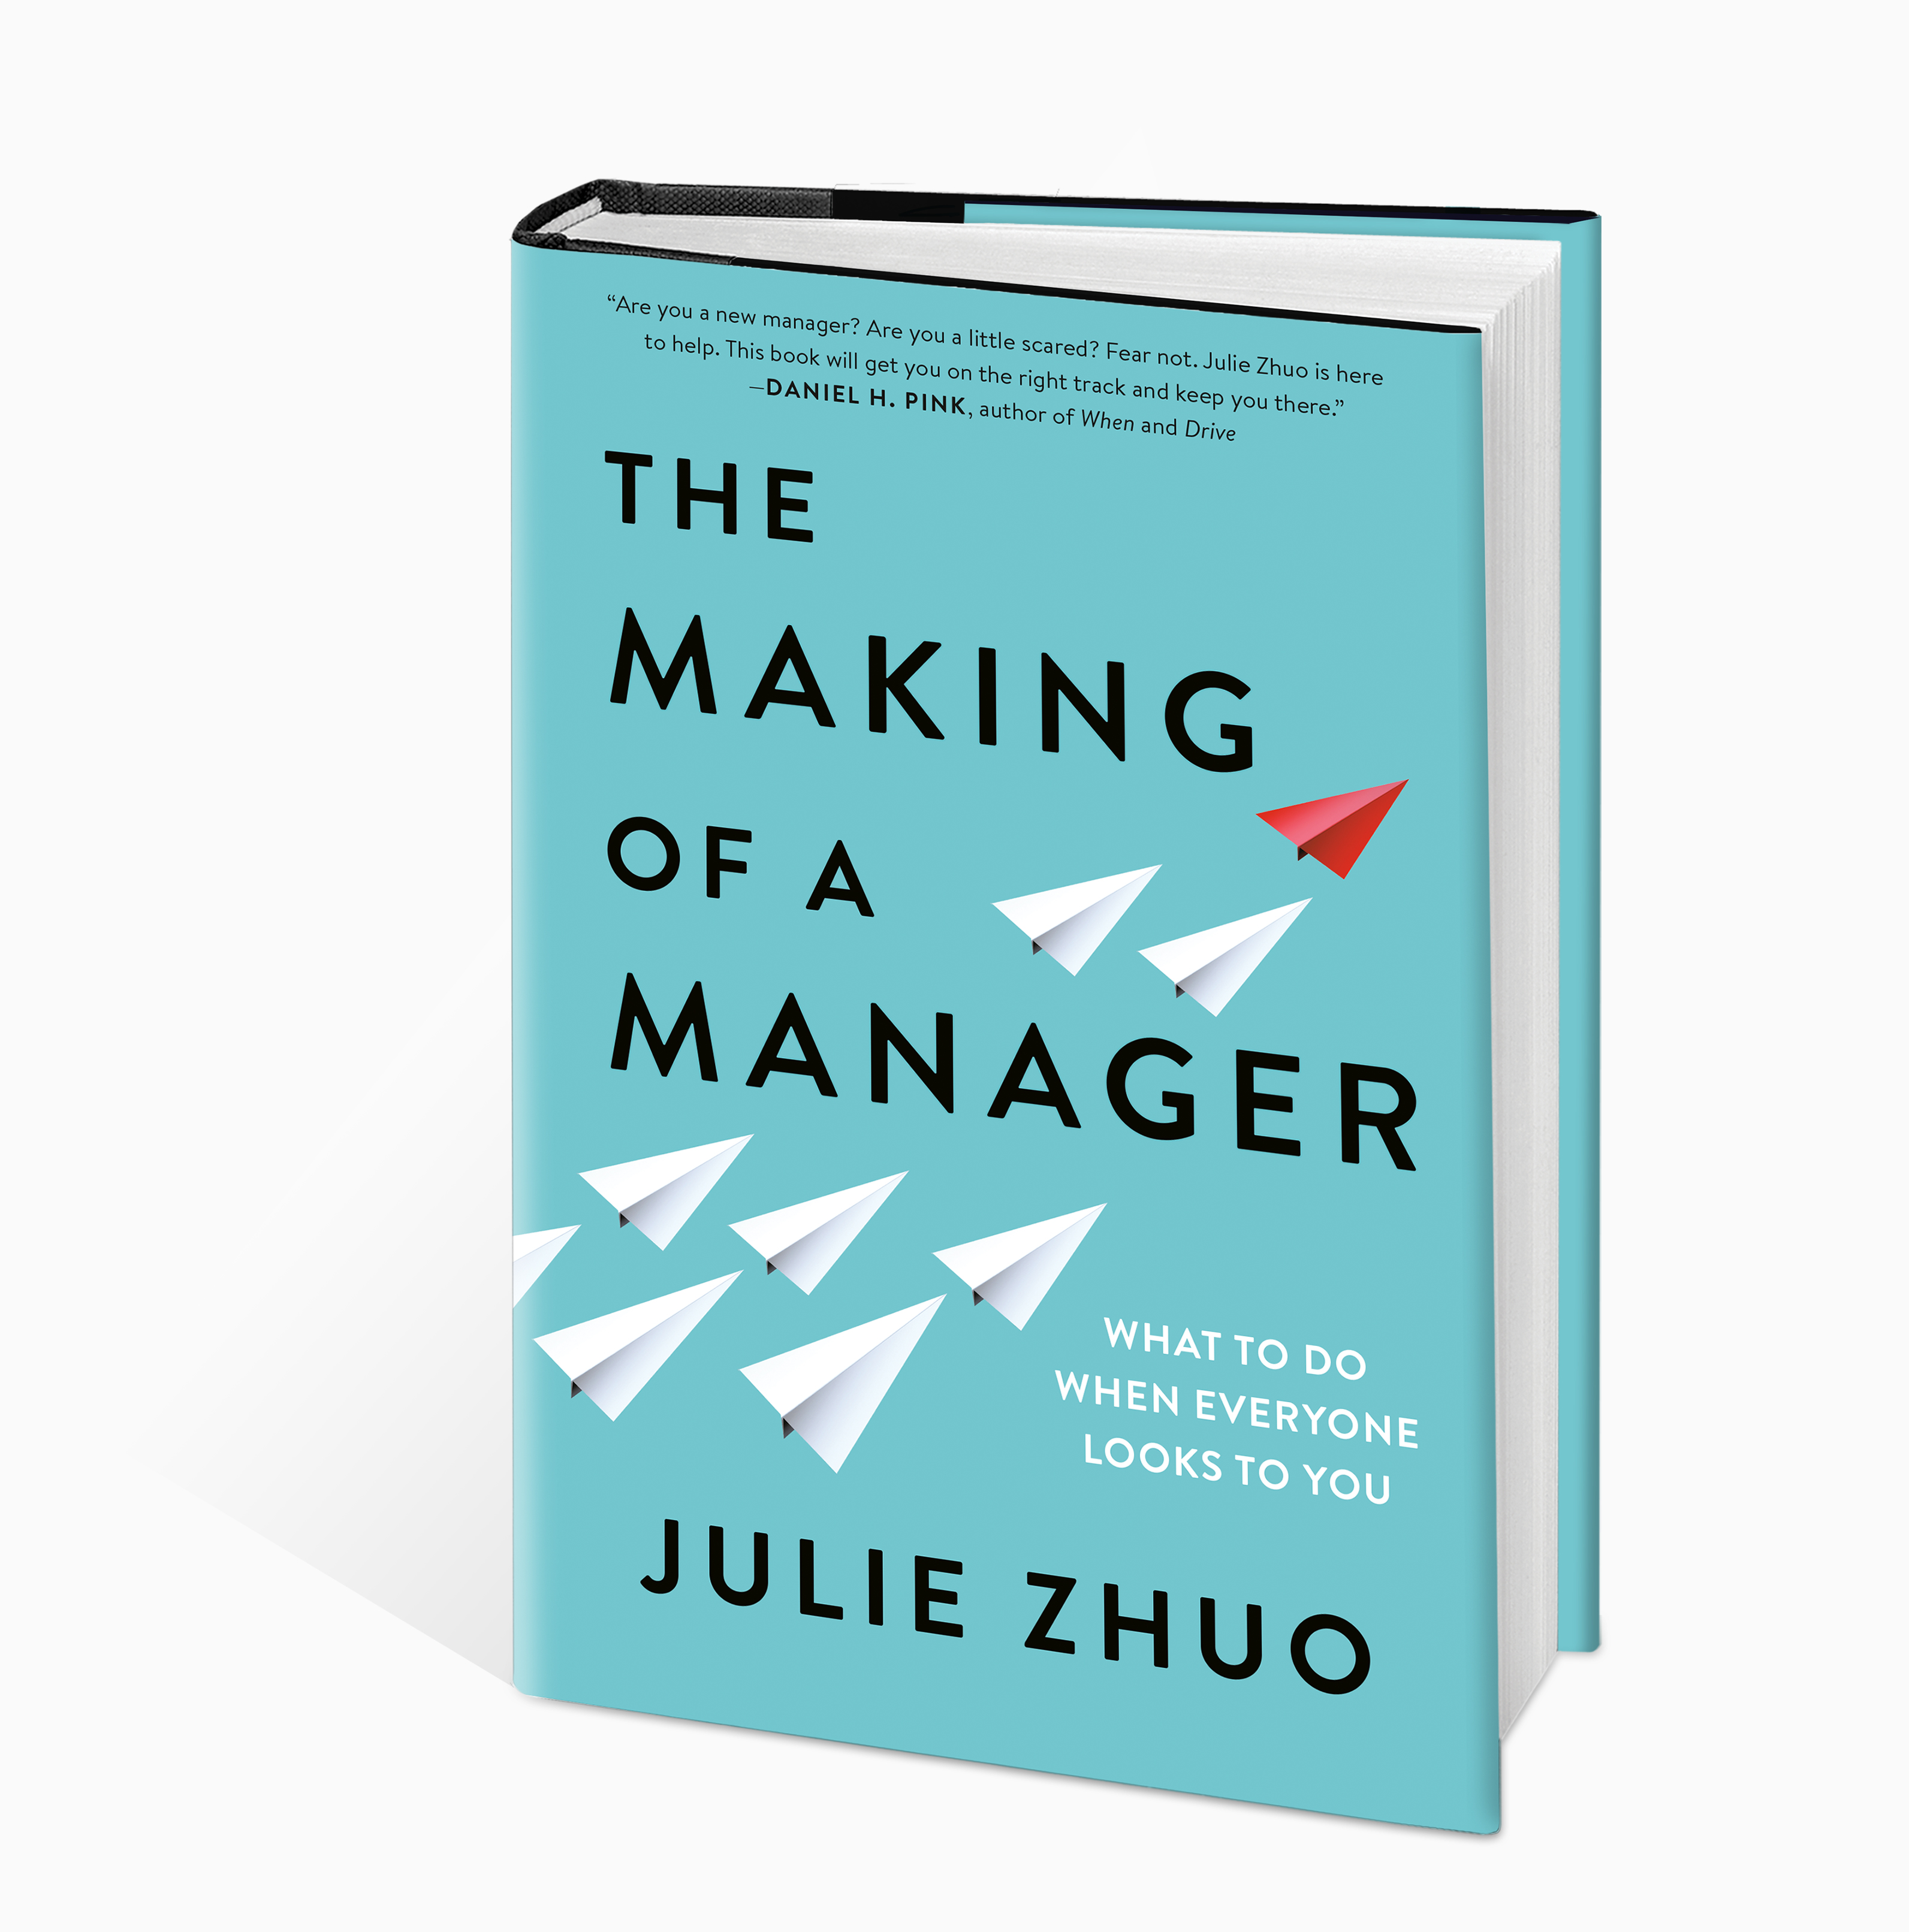 The Making of a Manager Book by Julie Zhuo